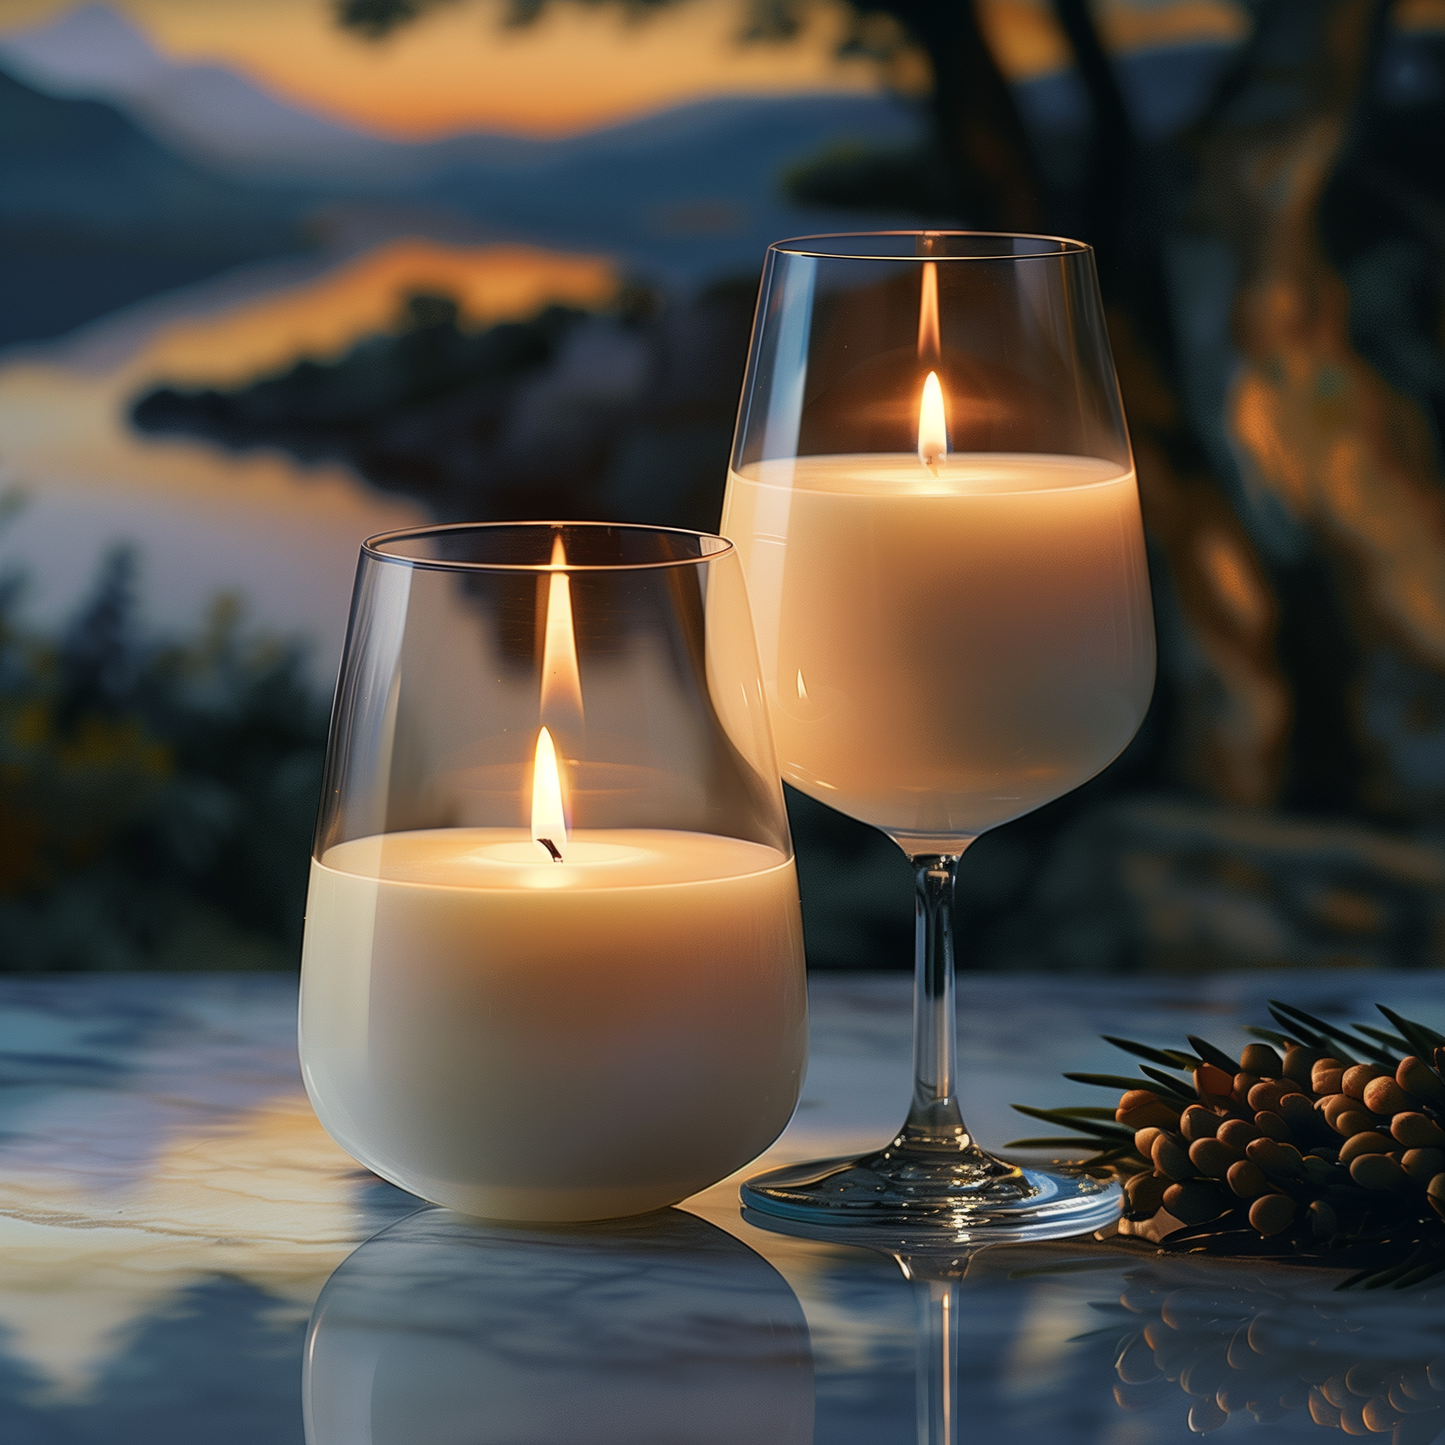 "Handmade Stemware Glass Candles: Elevate Your Home Decor with Unique Elegance" - Head Art Works LLC